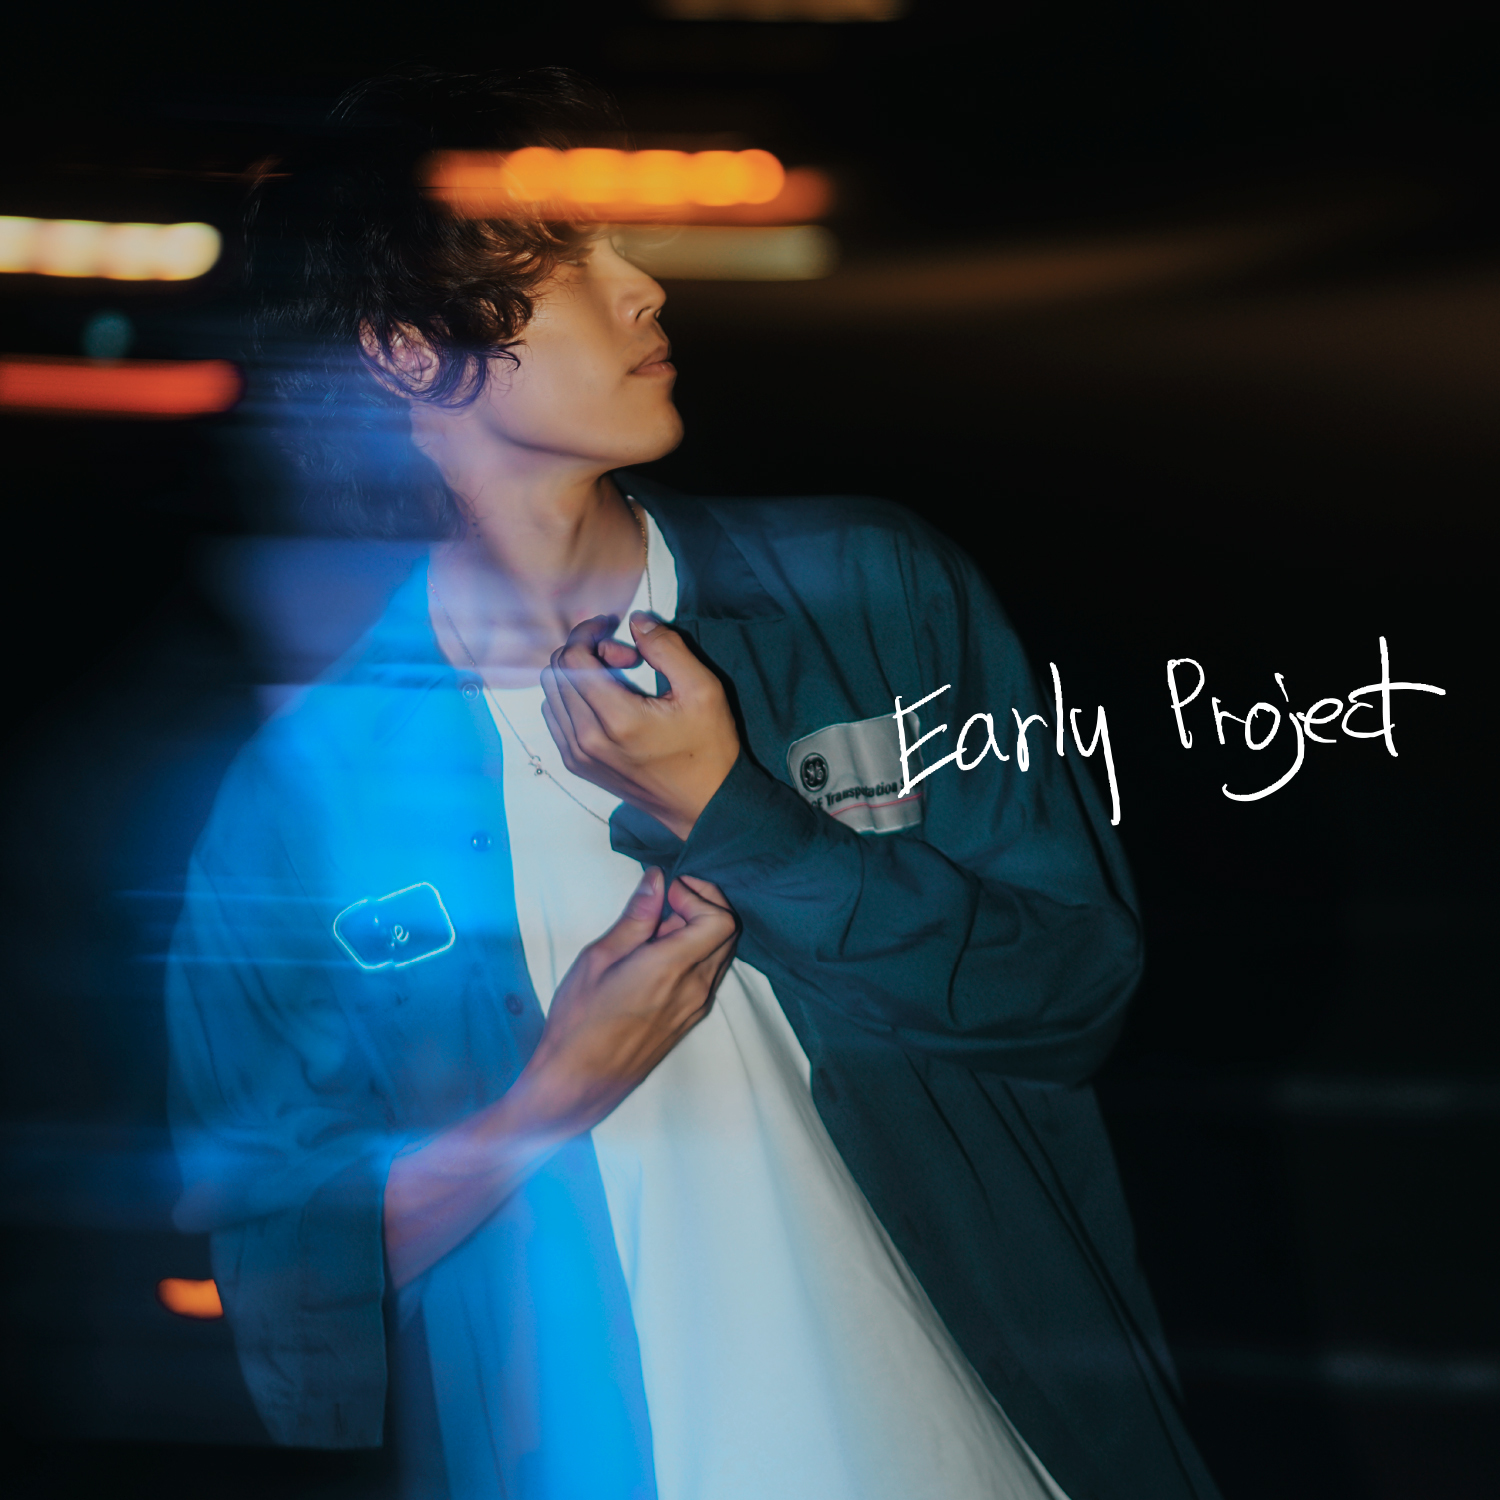 『Early Project』ジャケット